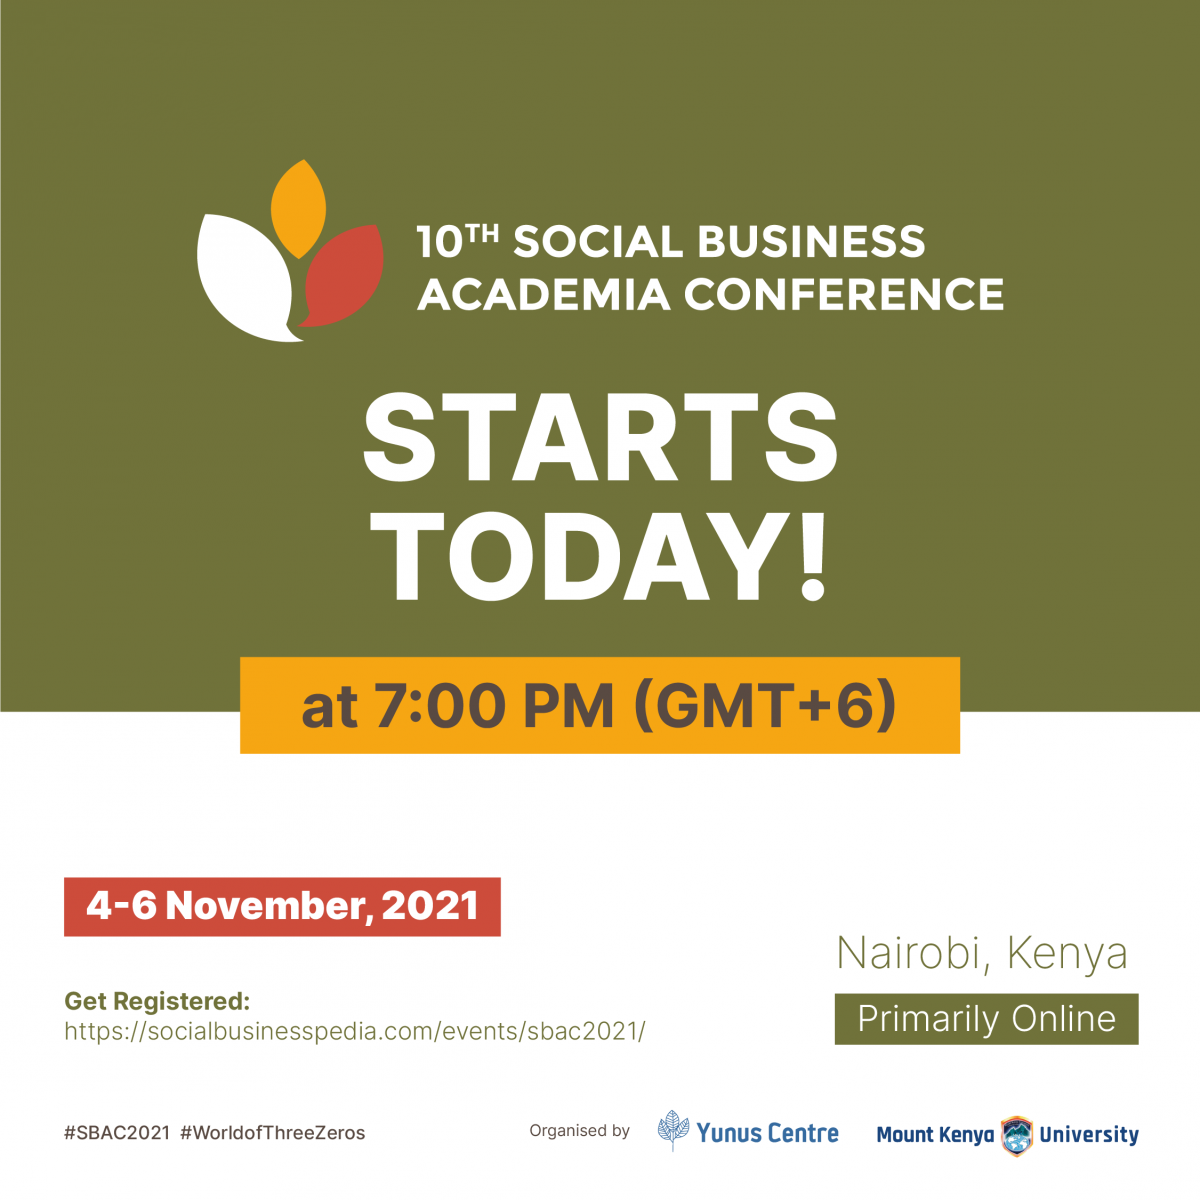 The 10th Social Business Academia Conference starts today!